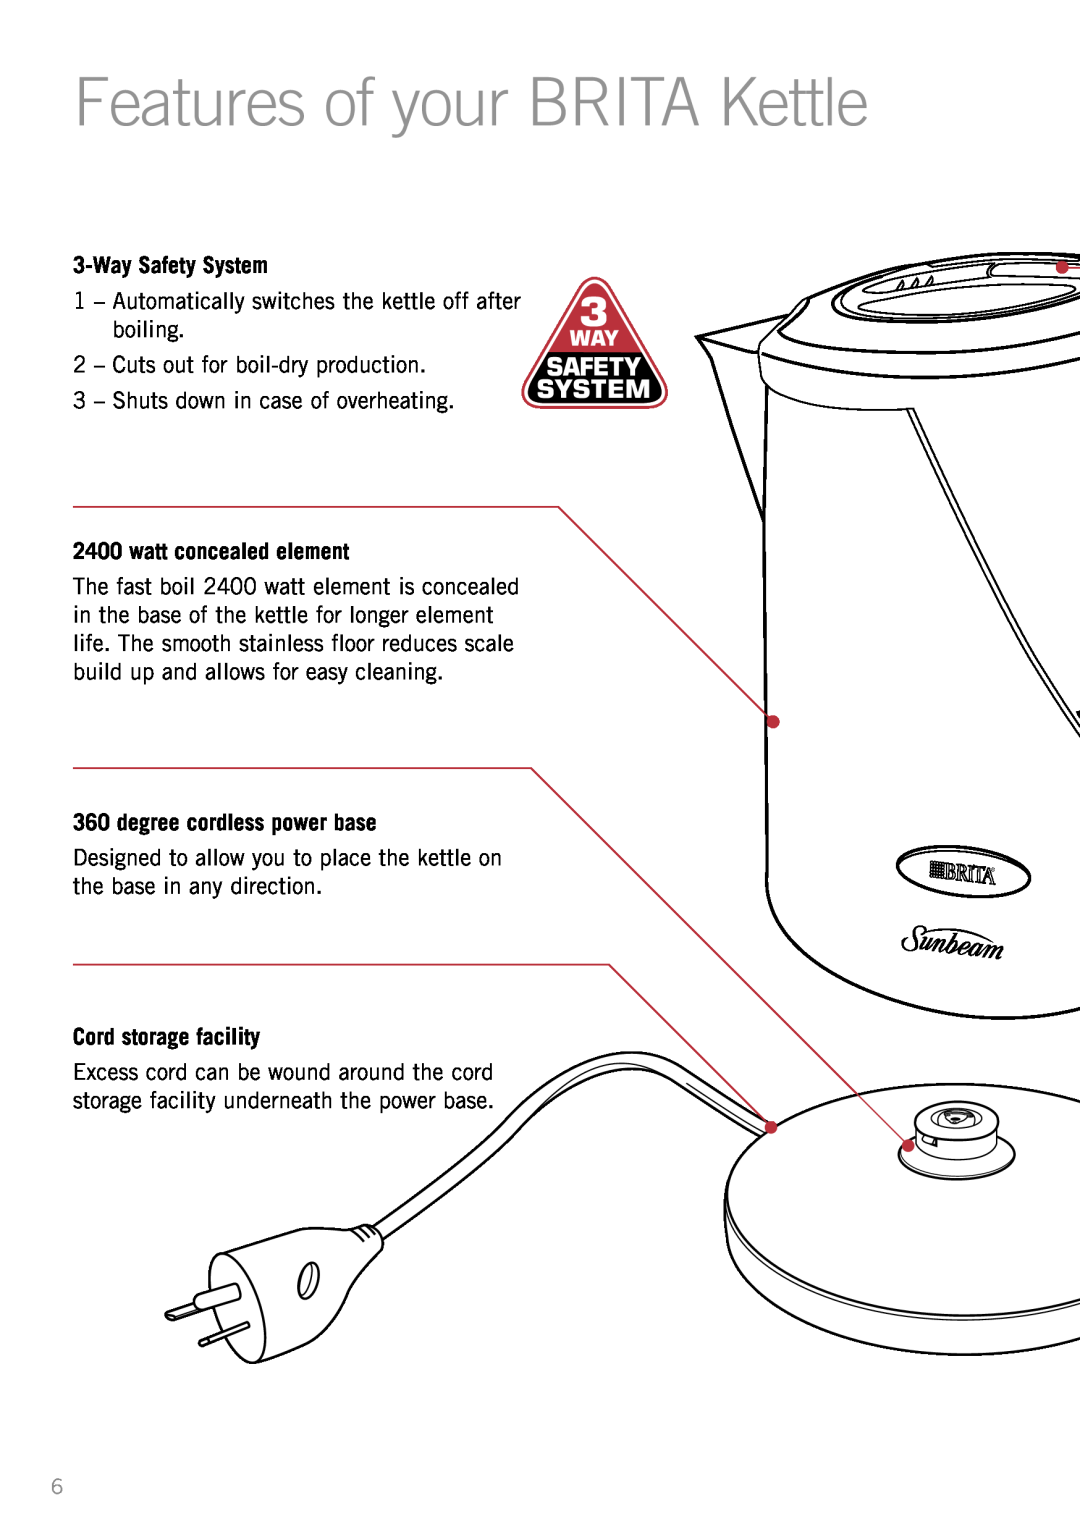 Sunbeam KE5300 manual Features of your BRITA Kettle, WaySafety System, watt concealed element, degree cordless power base 